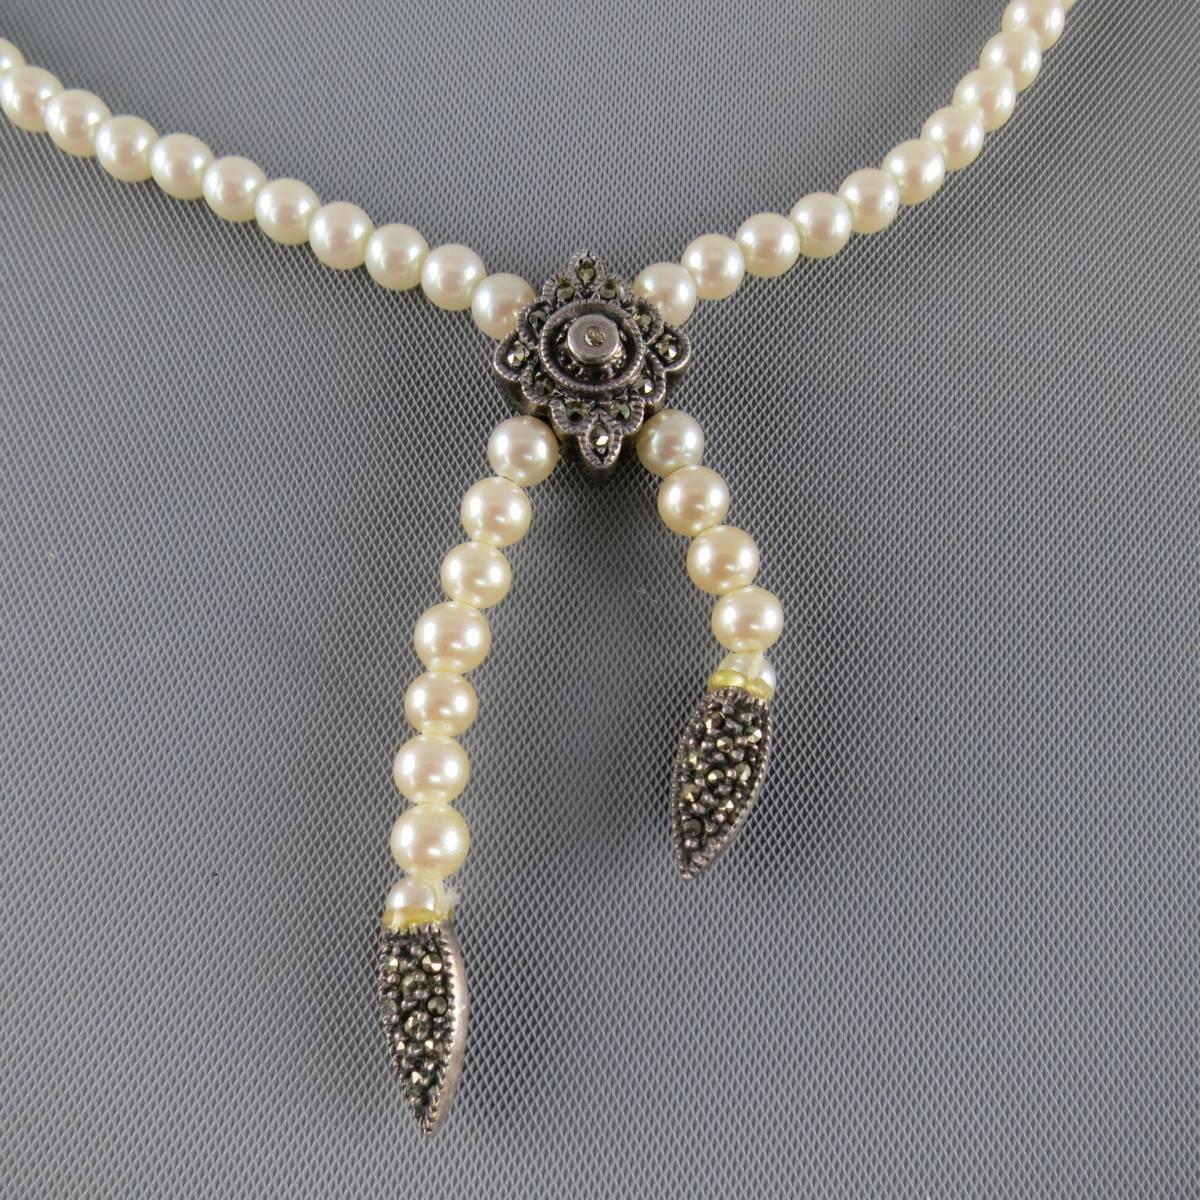 1940s pearl necklace